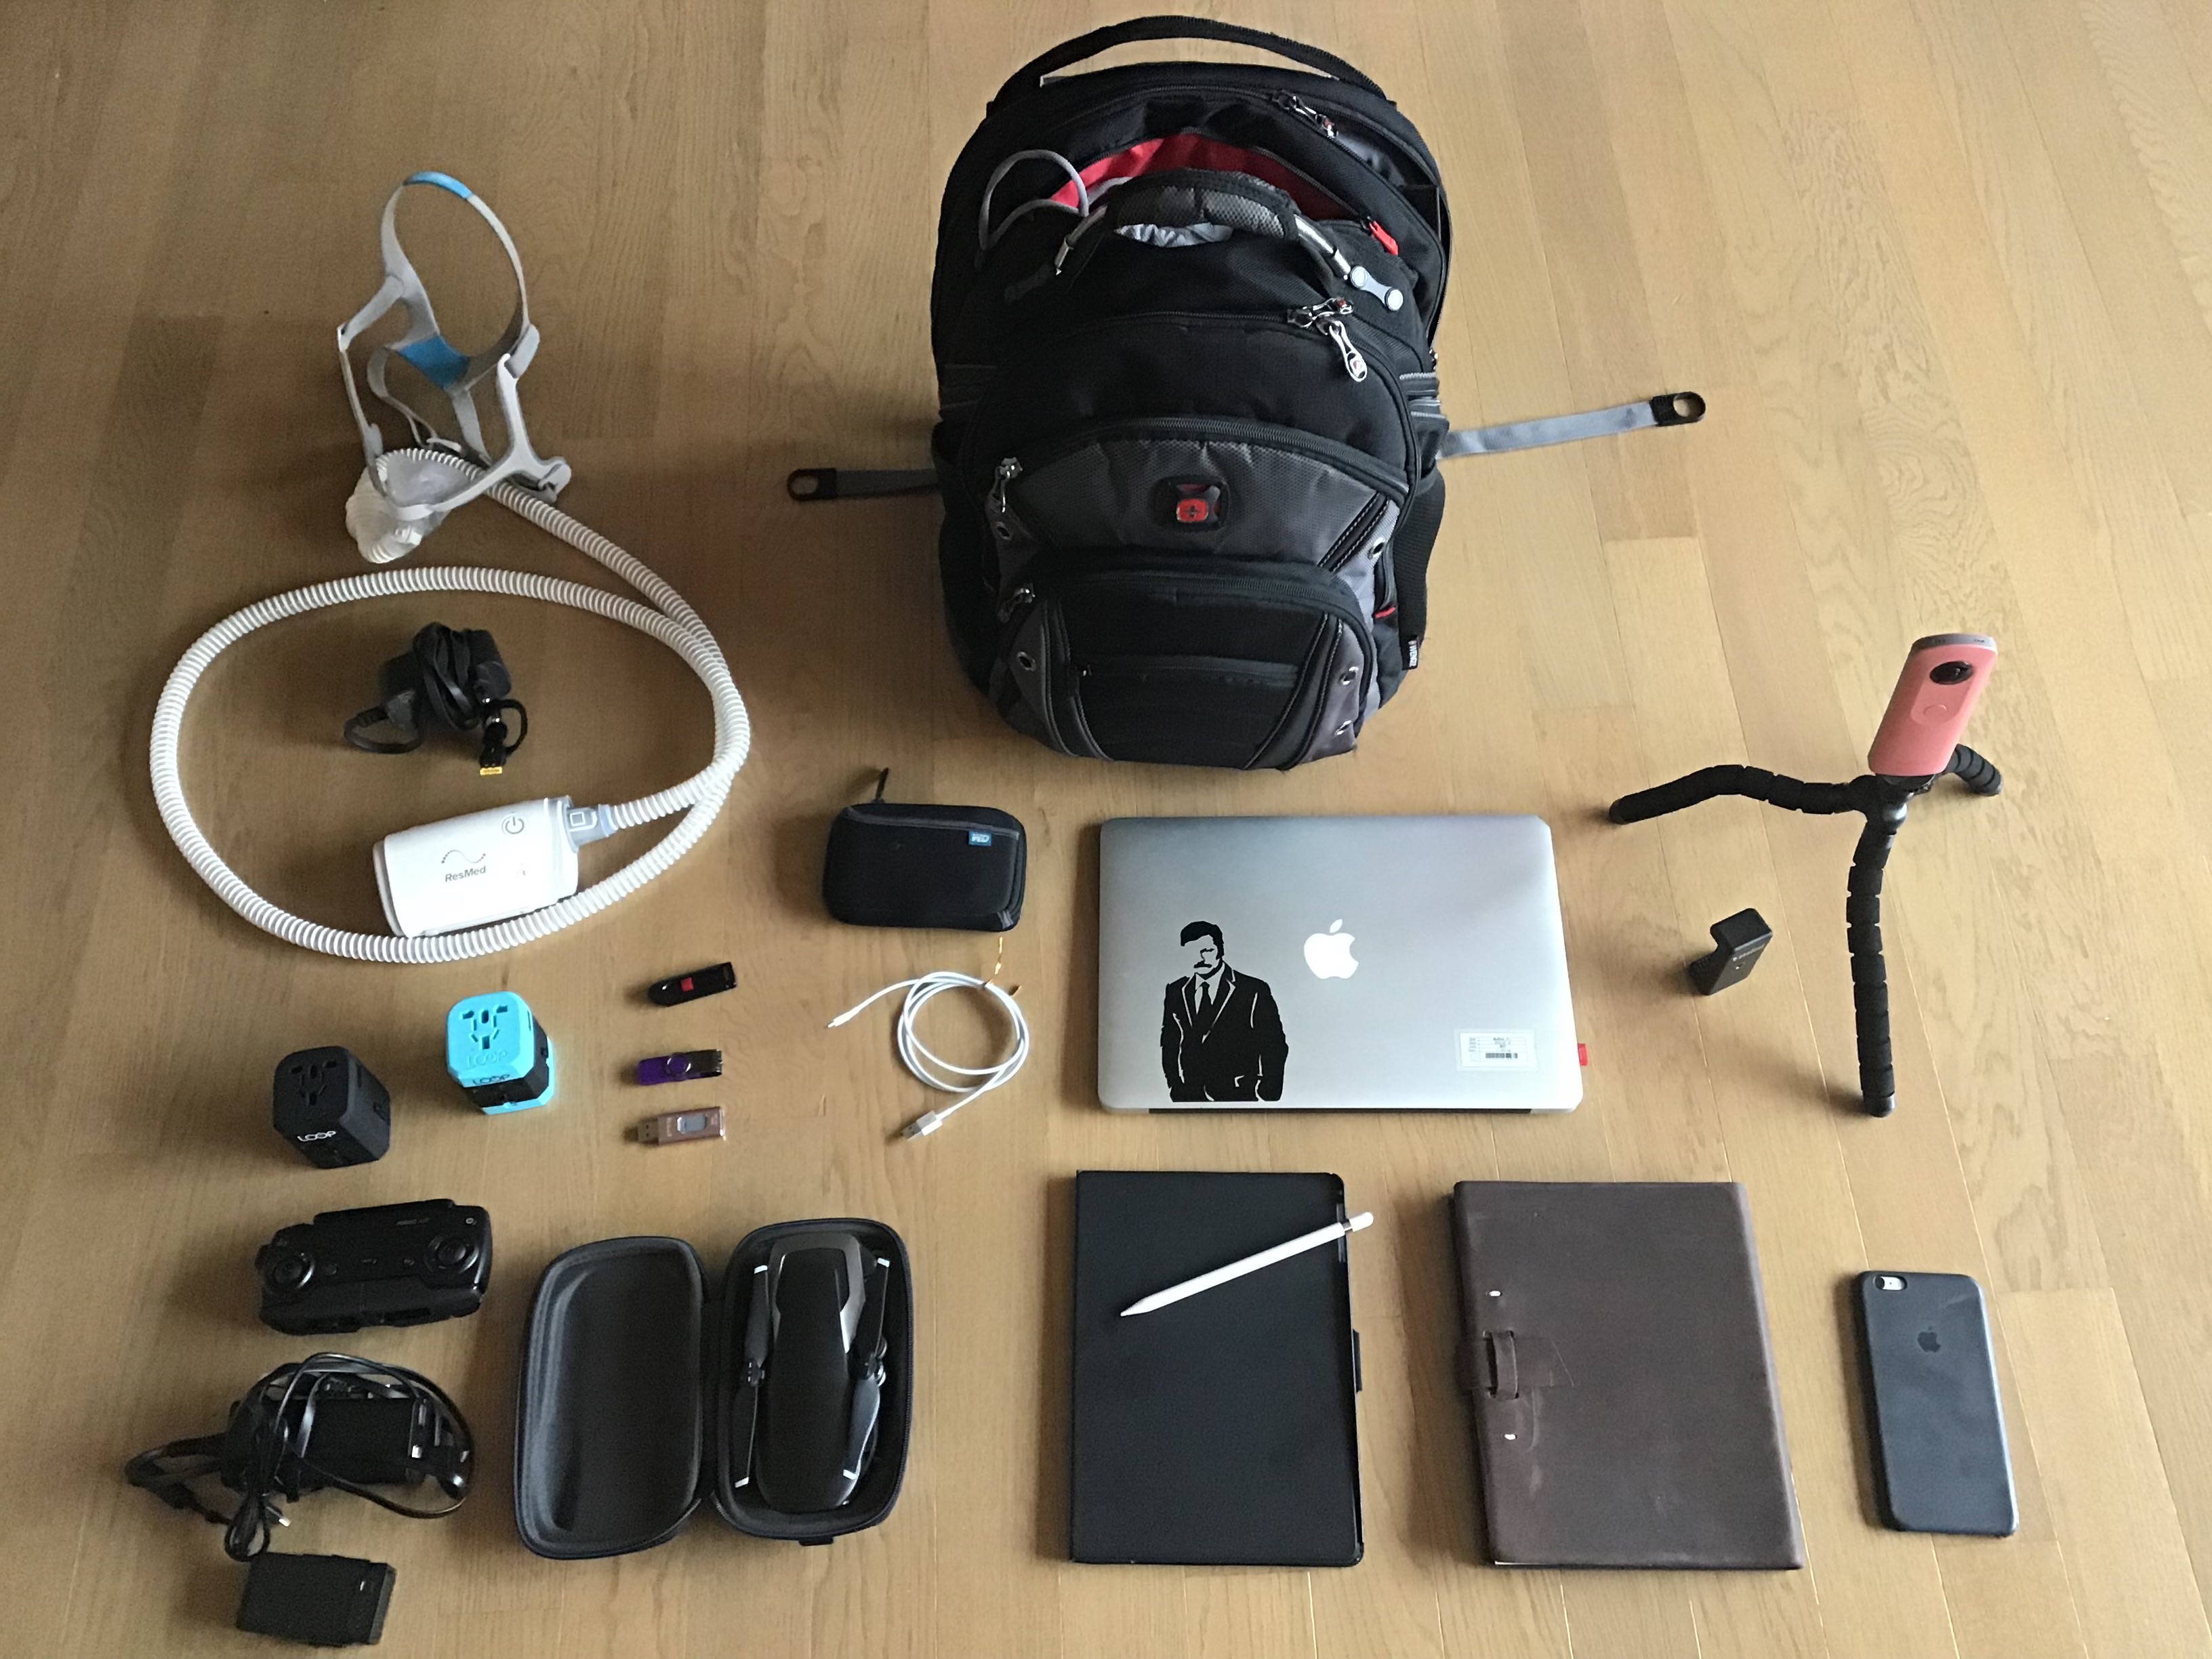 Part 3-The Travel Gear Diaries: Hardware